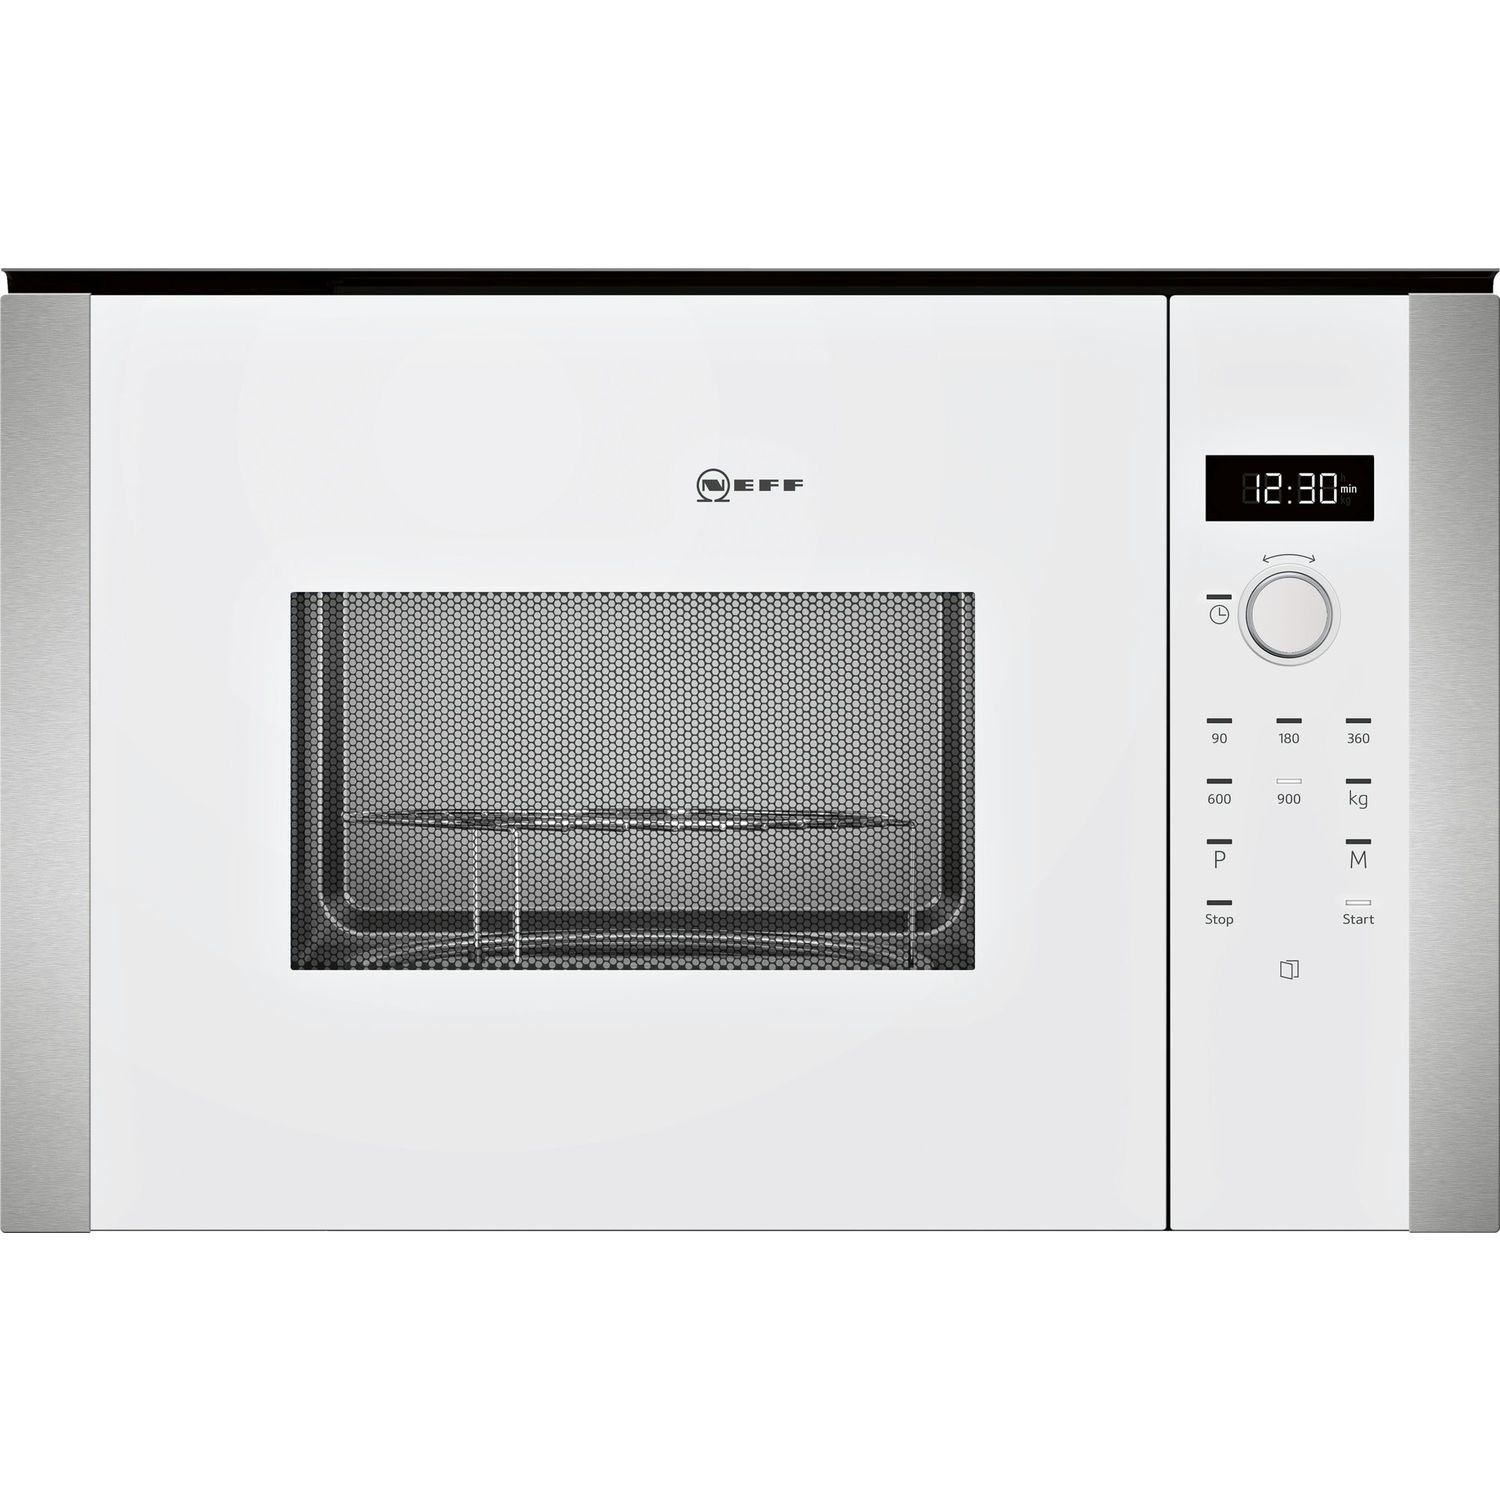 Neff Hlawd53w0b N50 900w 25l Compact Height Built In Microwave